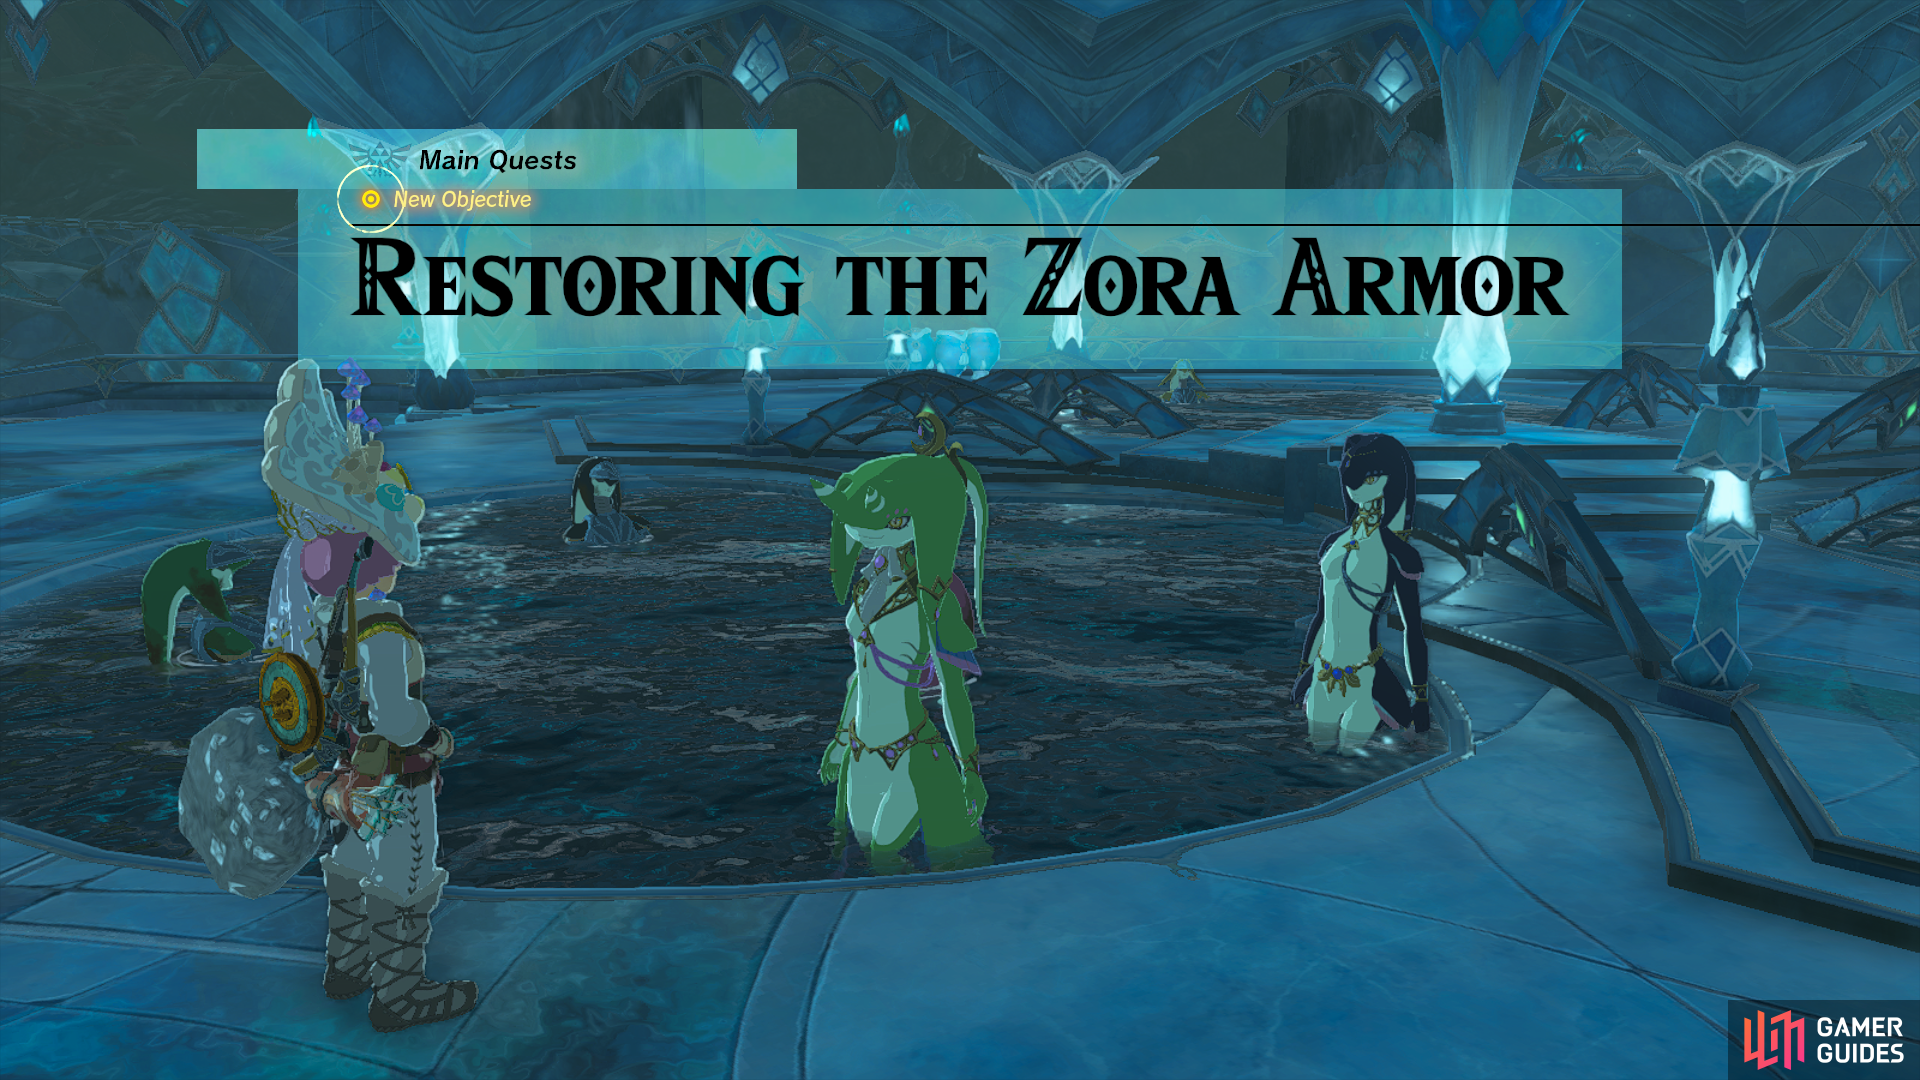 Starting the quest to get the Zora Armor.